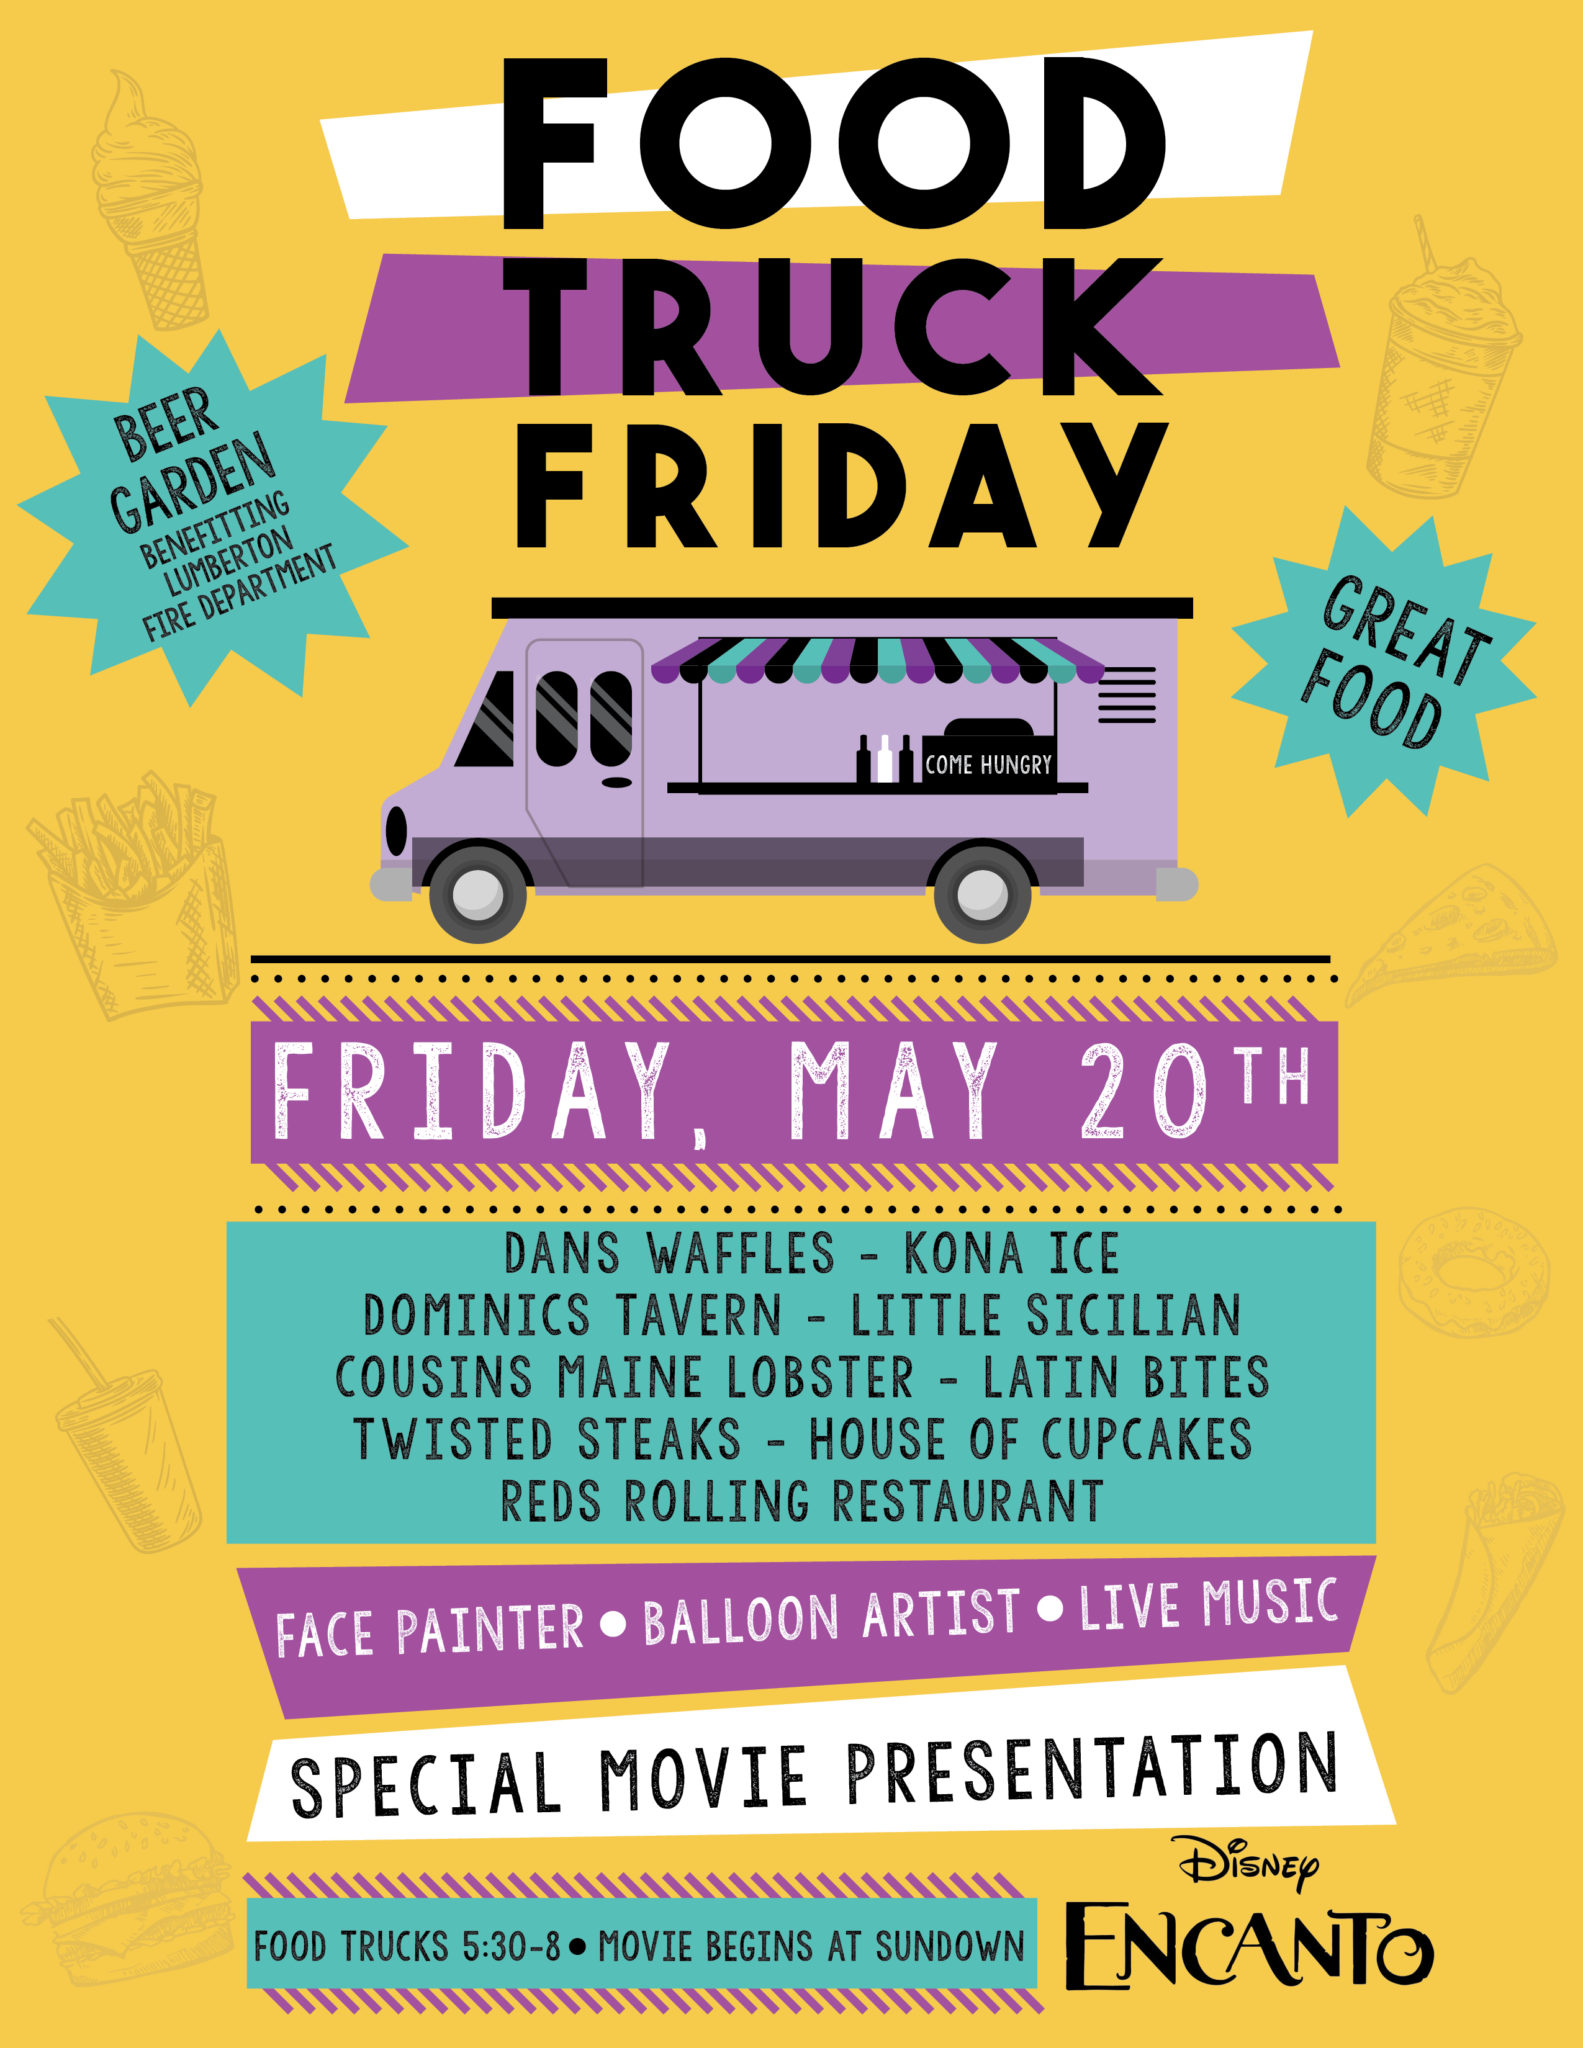 Lumberton Food Truck Event Scheduled for Friday, May 20th has been